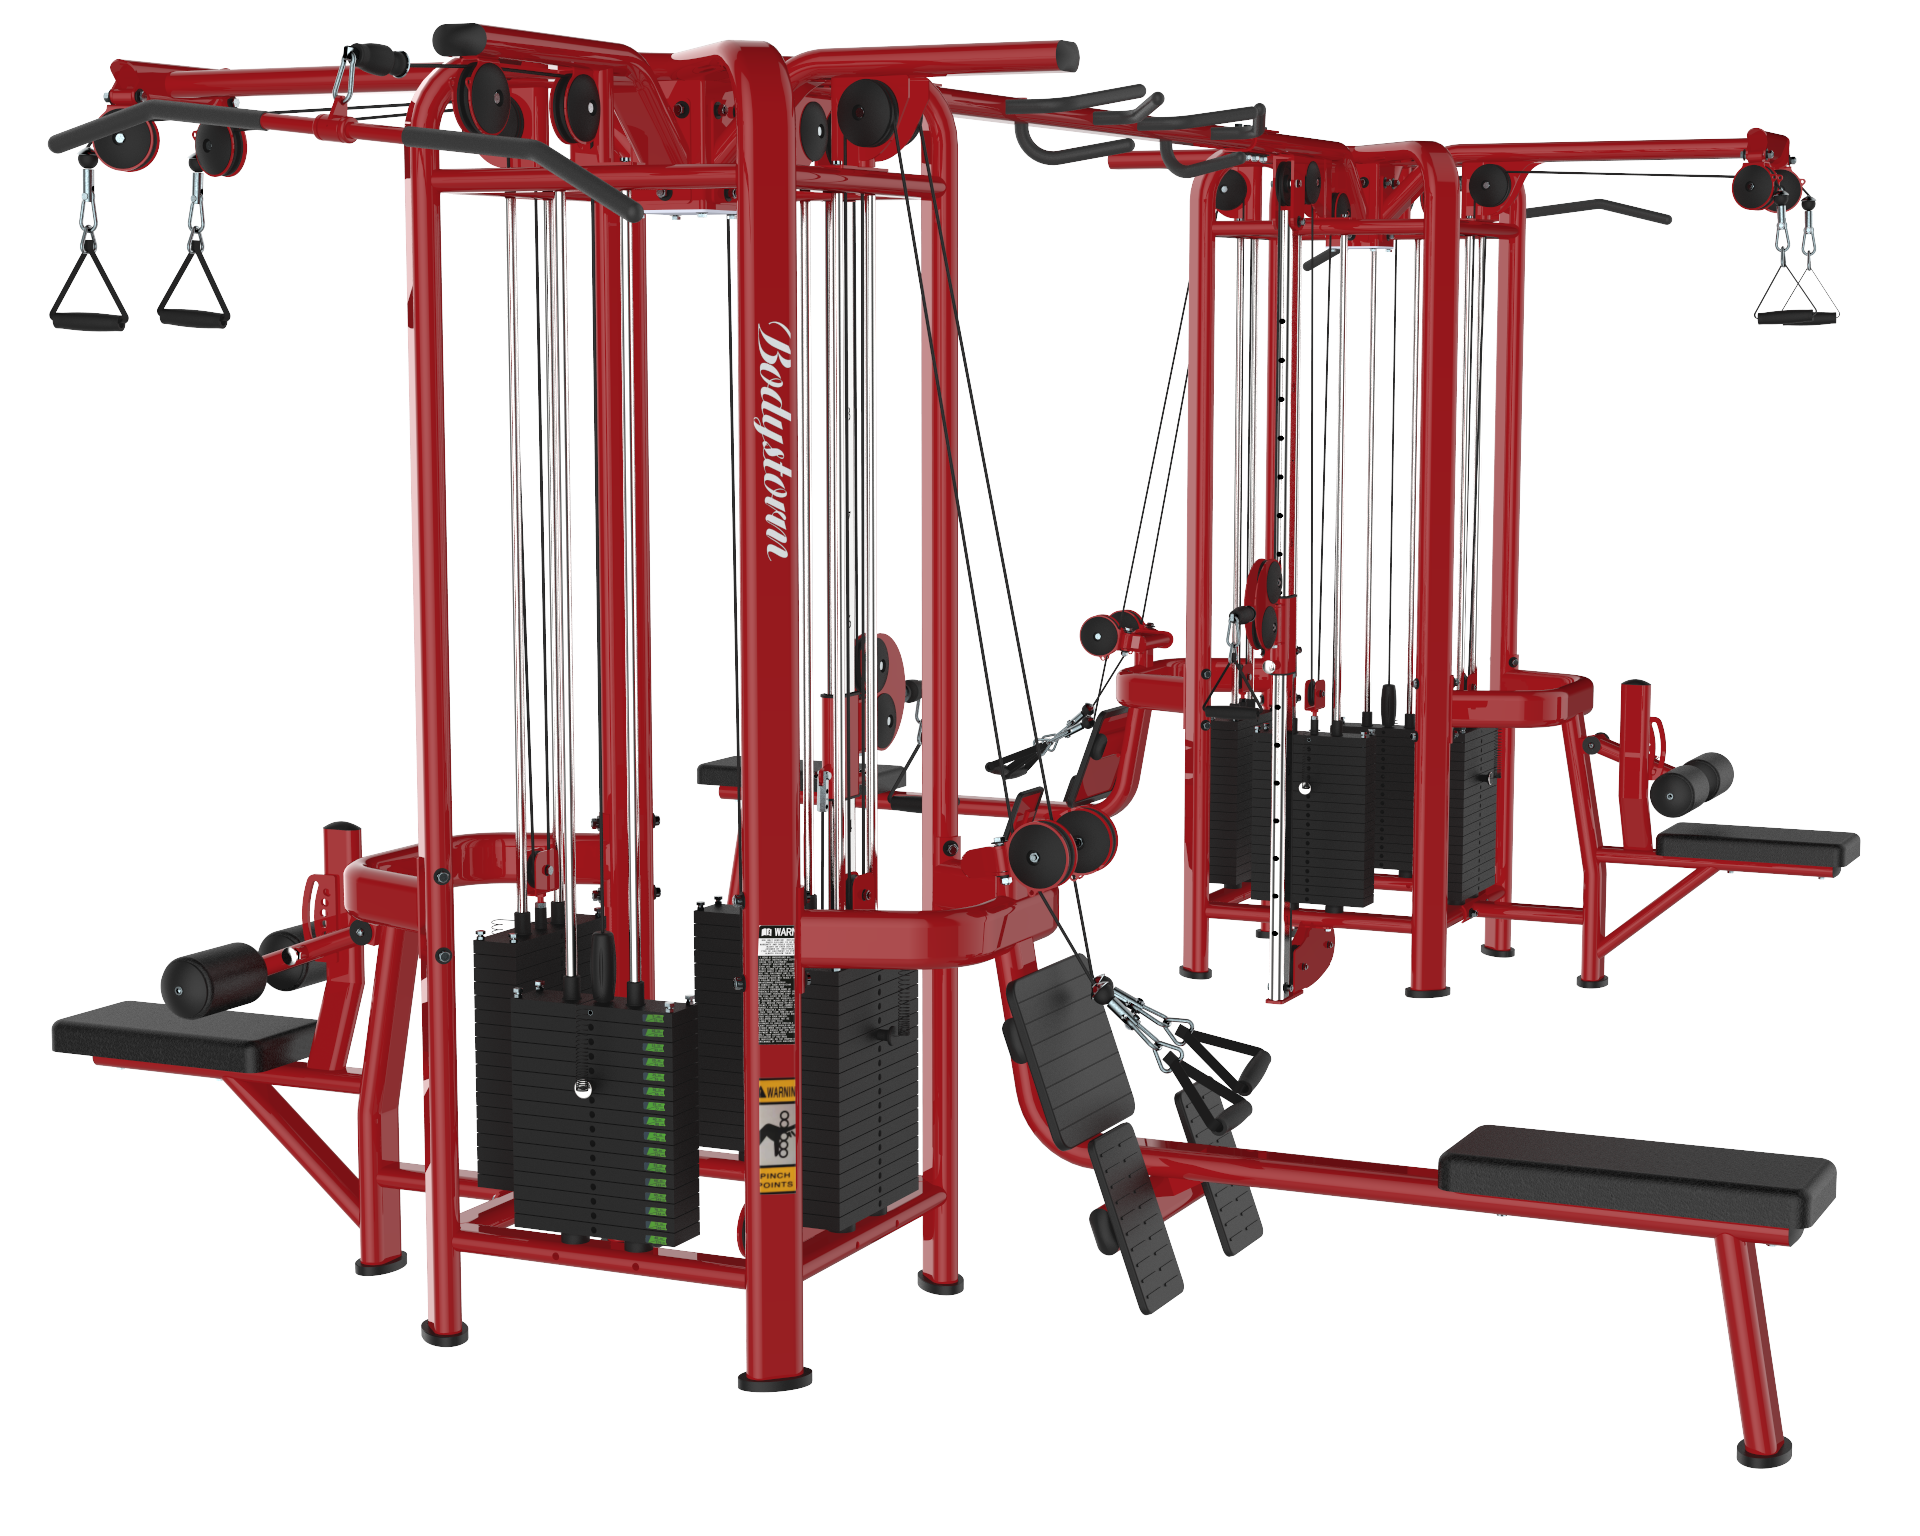 Eight Station Multi - Jungle  multi Function Station workout gym fitness equipment